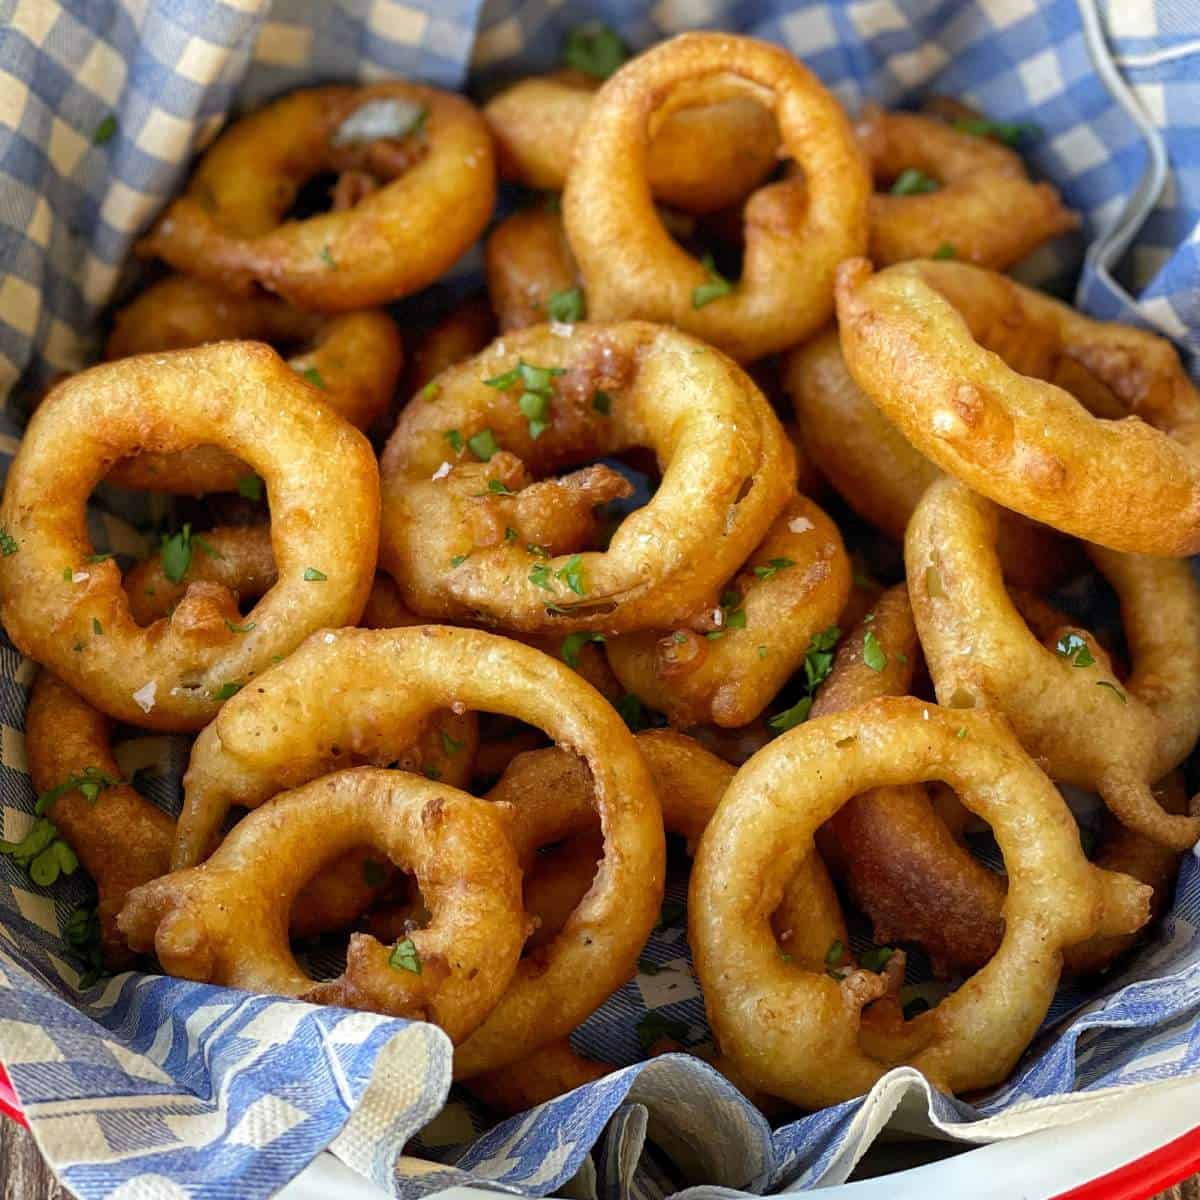 A bowl of fried Onion Rings.